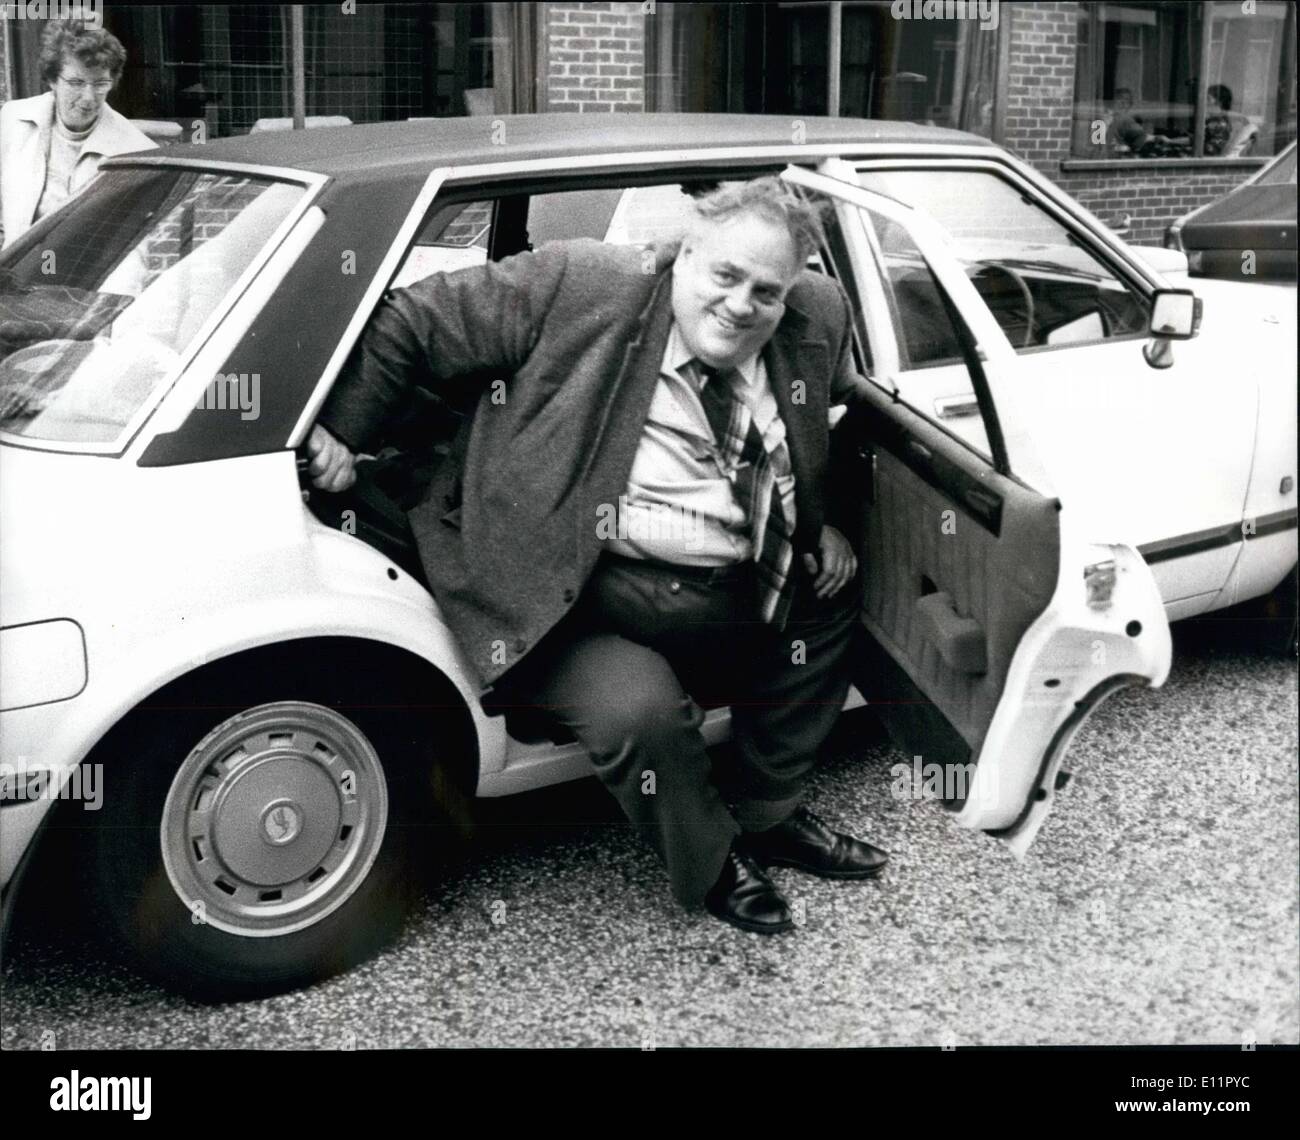 Sep. 09, 1979 - Cyril Smith's Made-To-Measure Car: Cyril Smith, at 20 stone, Britain's heavyweight M.P. shows off his latest gimmick, a limousine to suit his ample proportions, at the Liberal Party Conference, now taking place at Marget, Xent. It is a Ford Minster, which is basically a ''Stretched'' version of the Ford Graada. Two fact has been added to the Chassis and the rear door widened. Photo shows Cyril Smith arriving at the assembly in Margate yesterday in his special wide-door car. Stock Photo